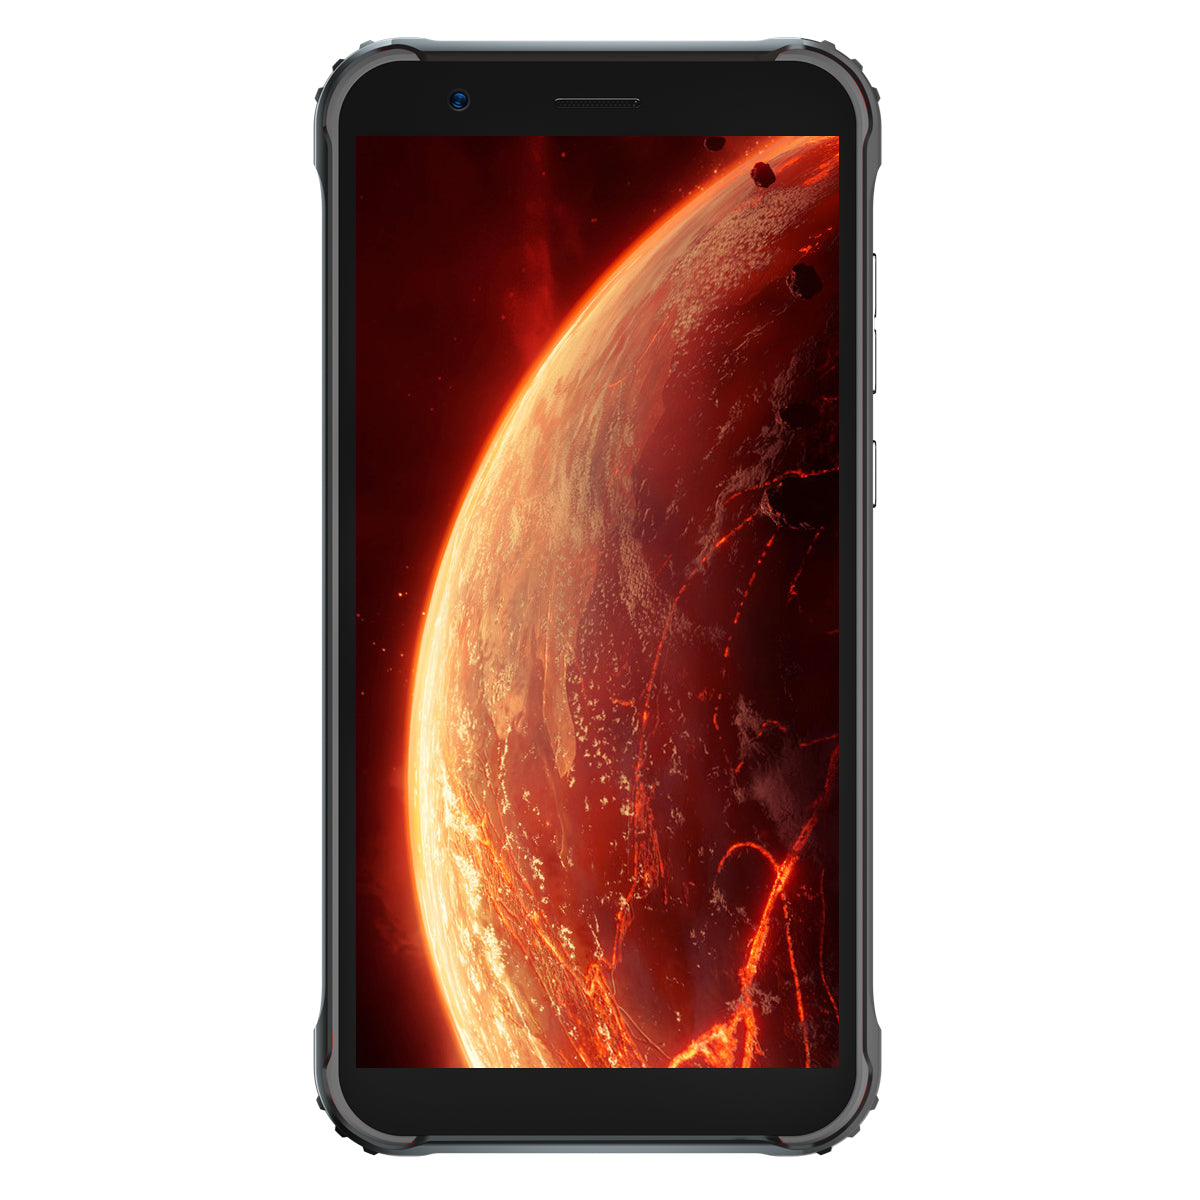 Blackview 4900 - Rugged Phone